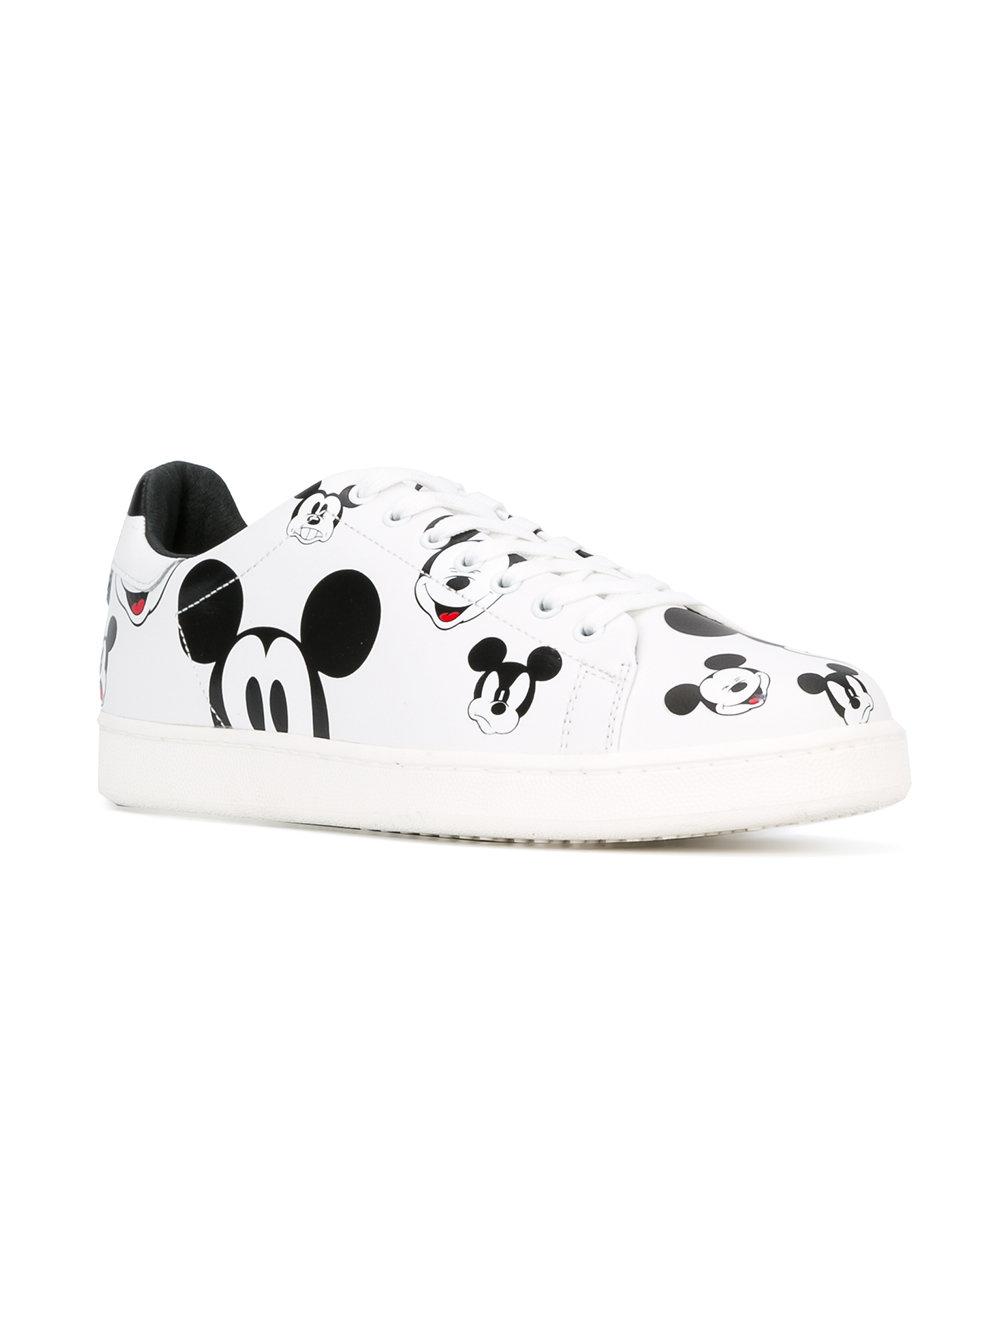 MOA Leather Mickey Mouse Printed Low Top Sneakers in White for Men - Lyst